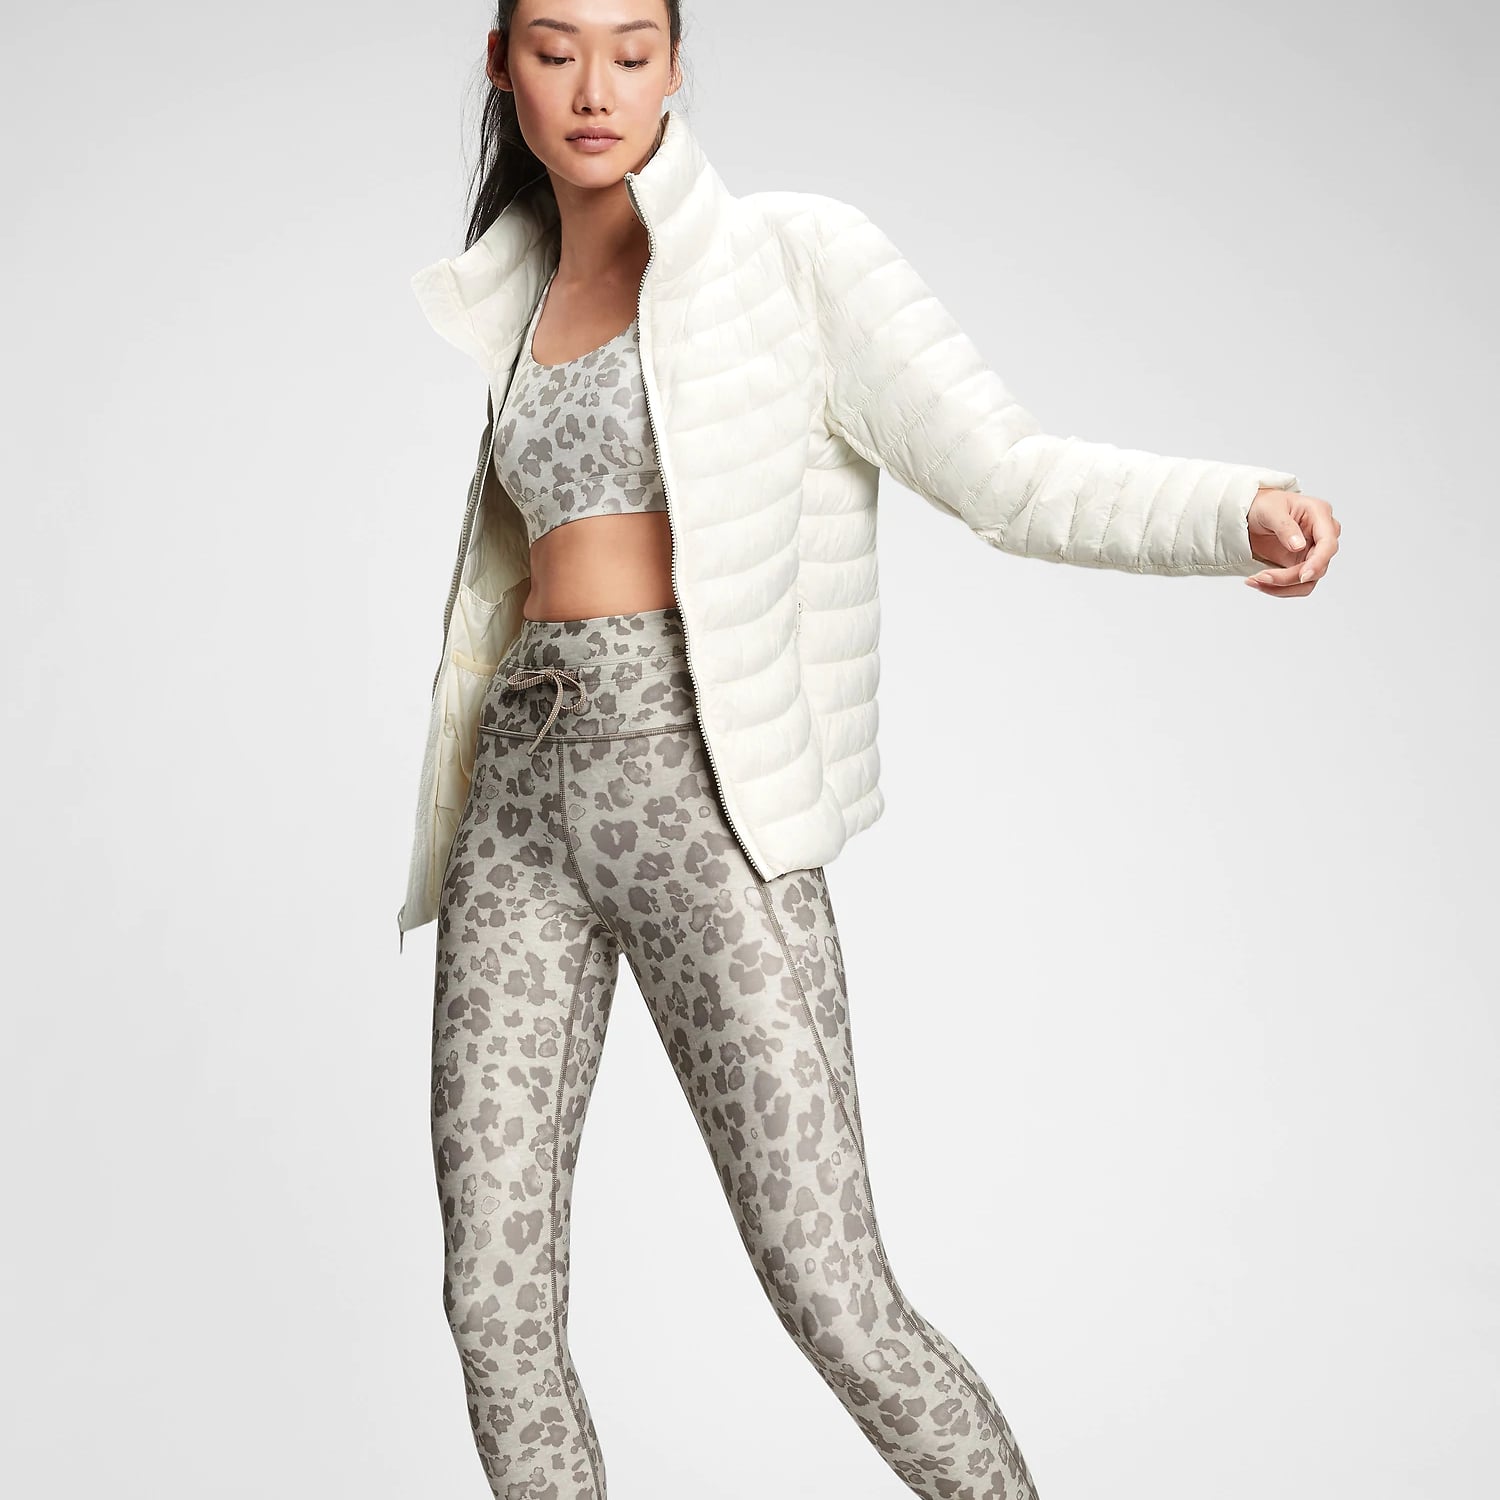 Gap GapFit Textured Stripe Leggings in Sculpt Compression, We Compared 12  Gap Leggings So You Can See Beyond Their Looks